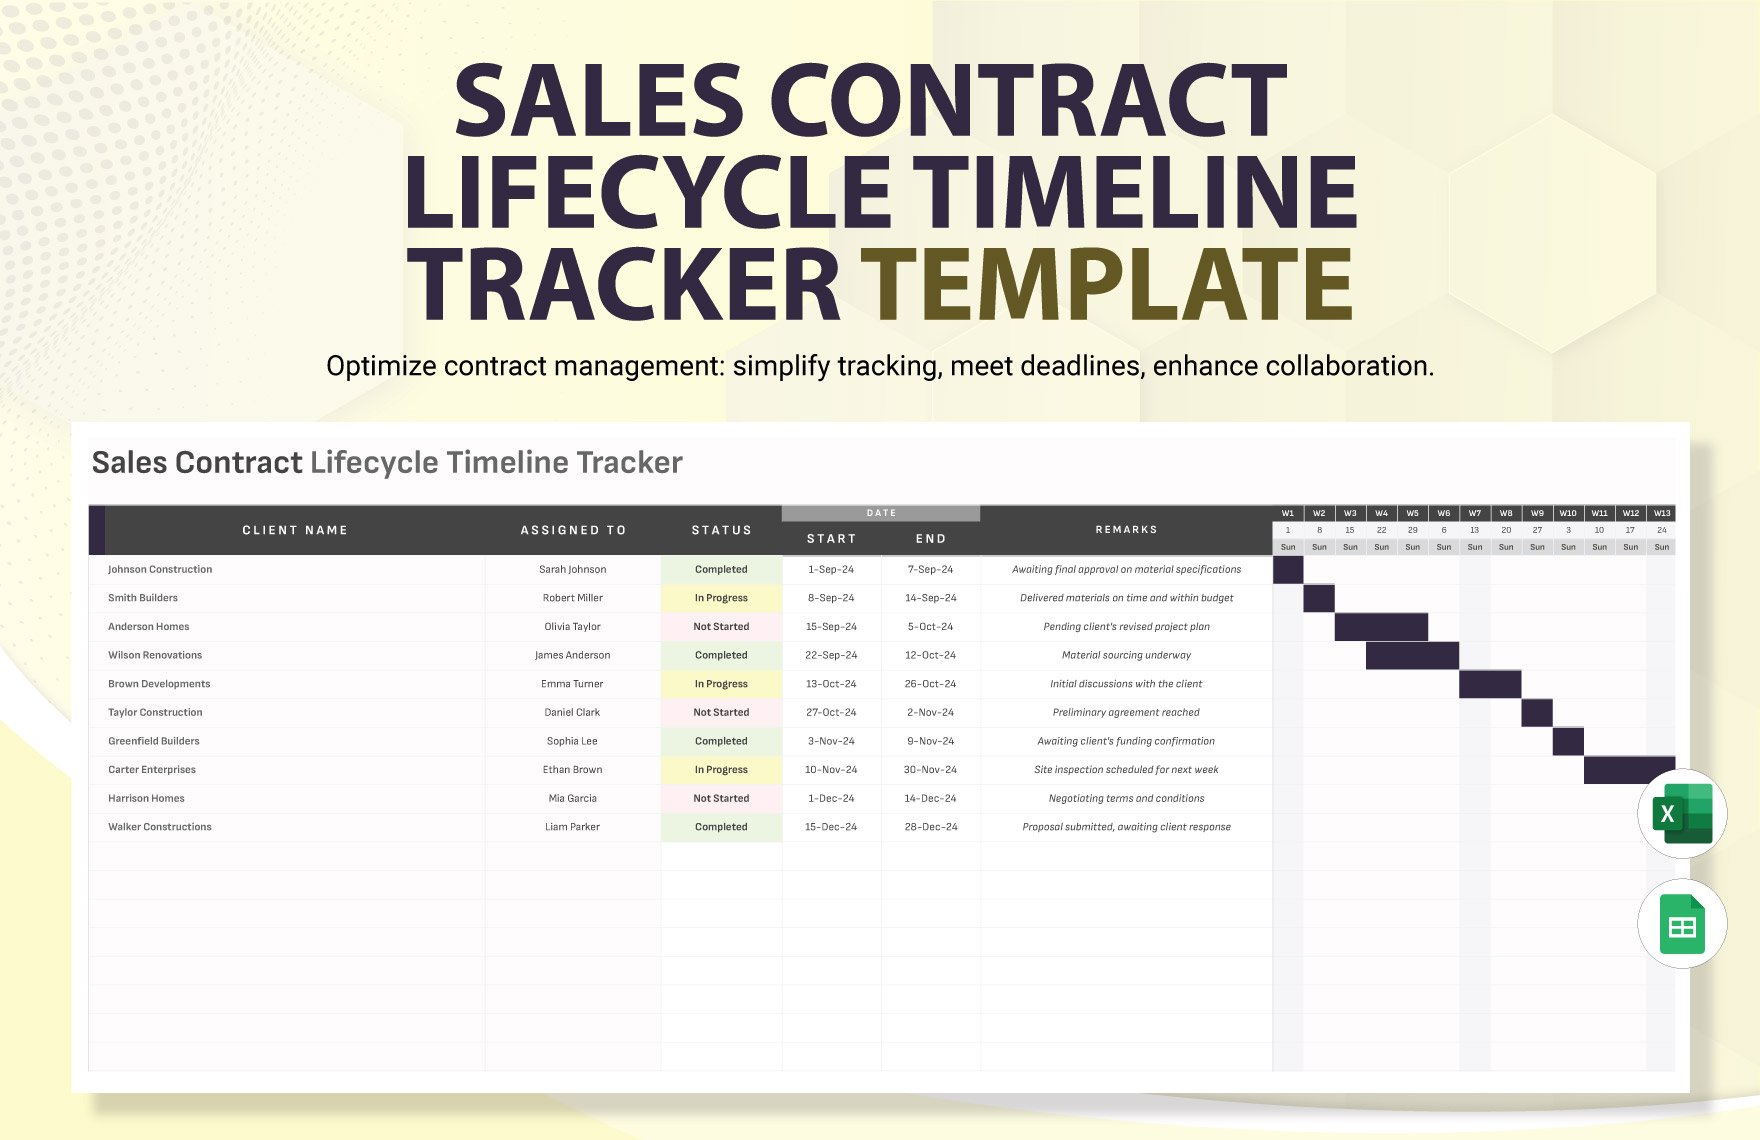 Sales Contract Lifecycle Timeline Tracker Template